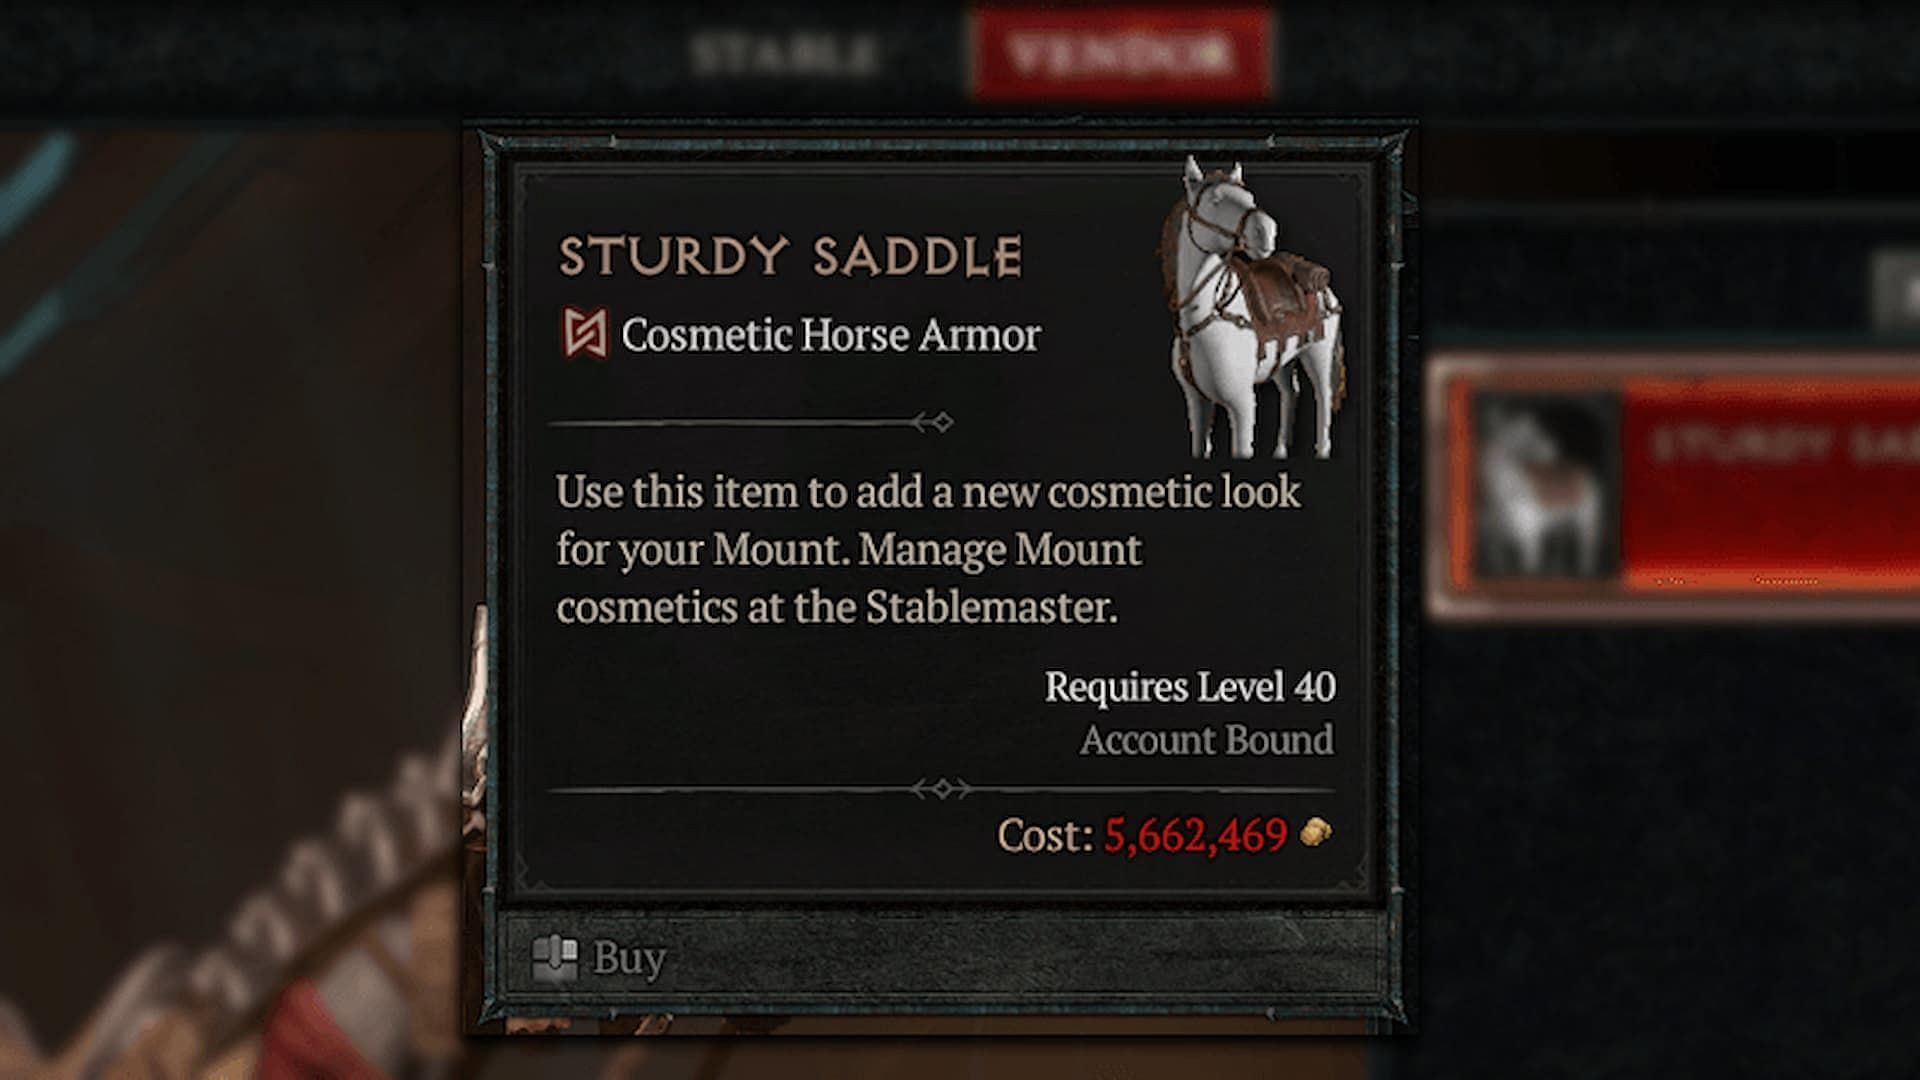 The Sturdy Saddle is one of the mount armors available in-game (Image via Blizzard)